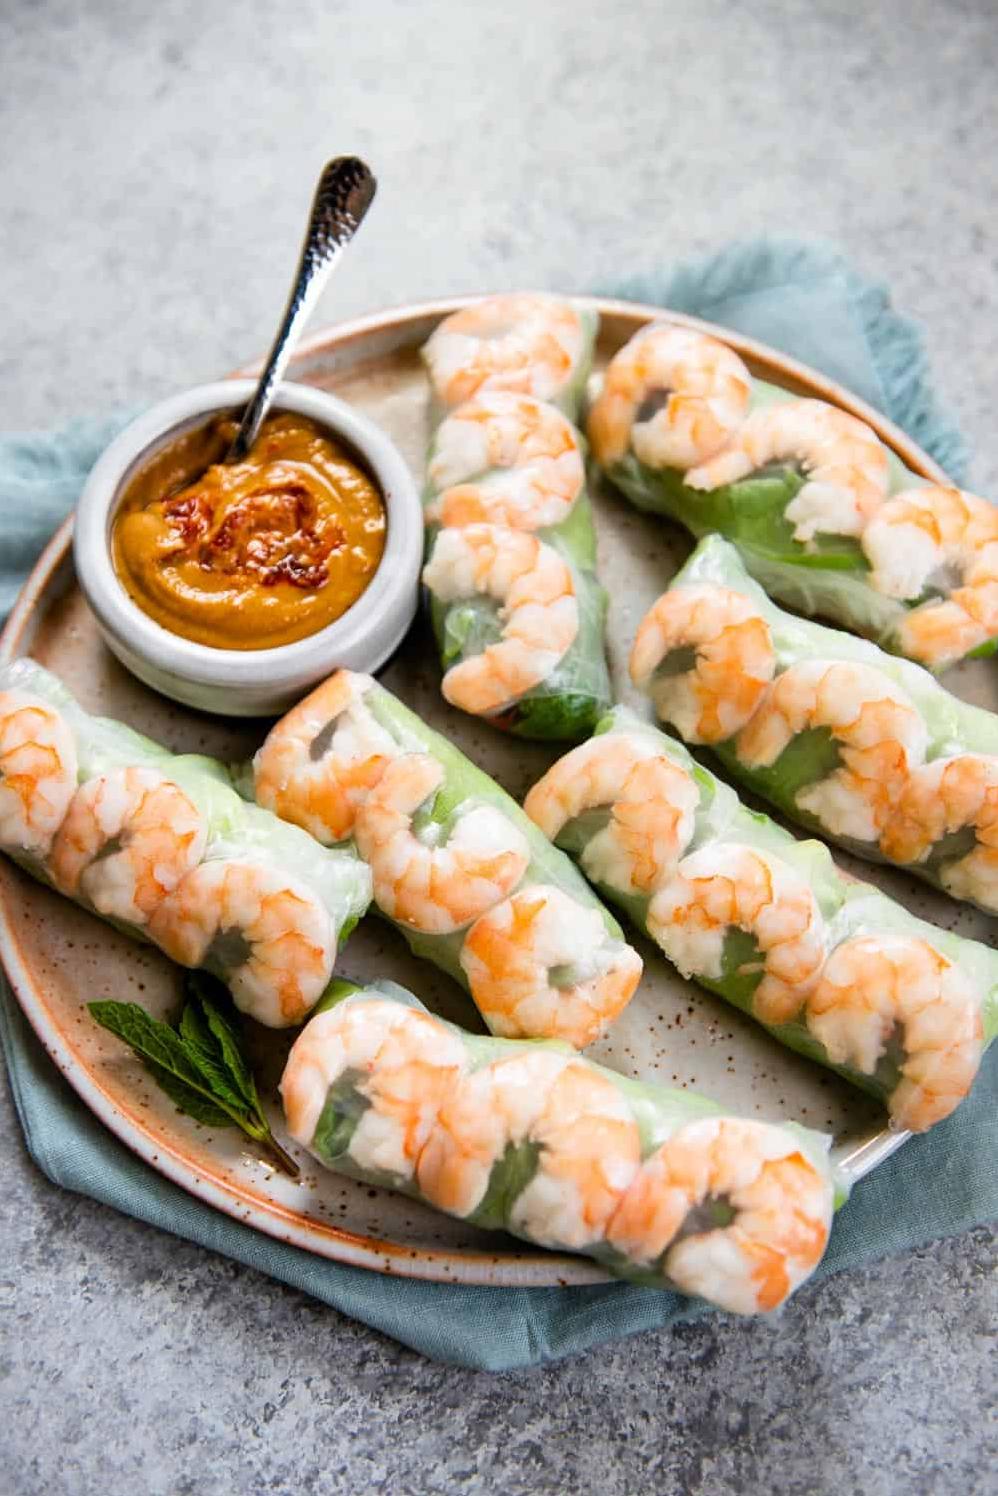  Impress your guests with these restaurant-quality shrimp rolls - they'll be amazed!